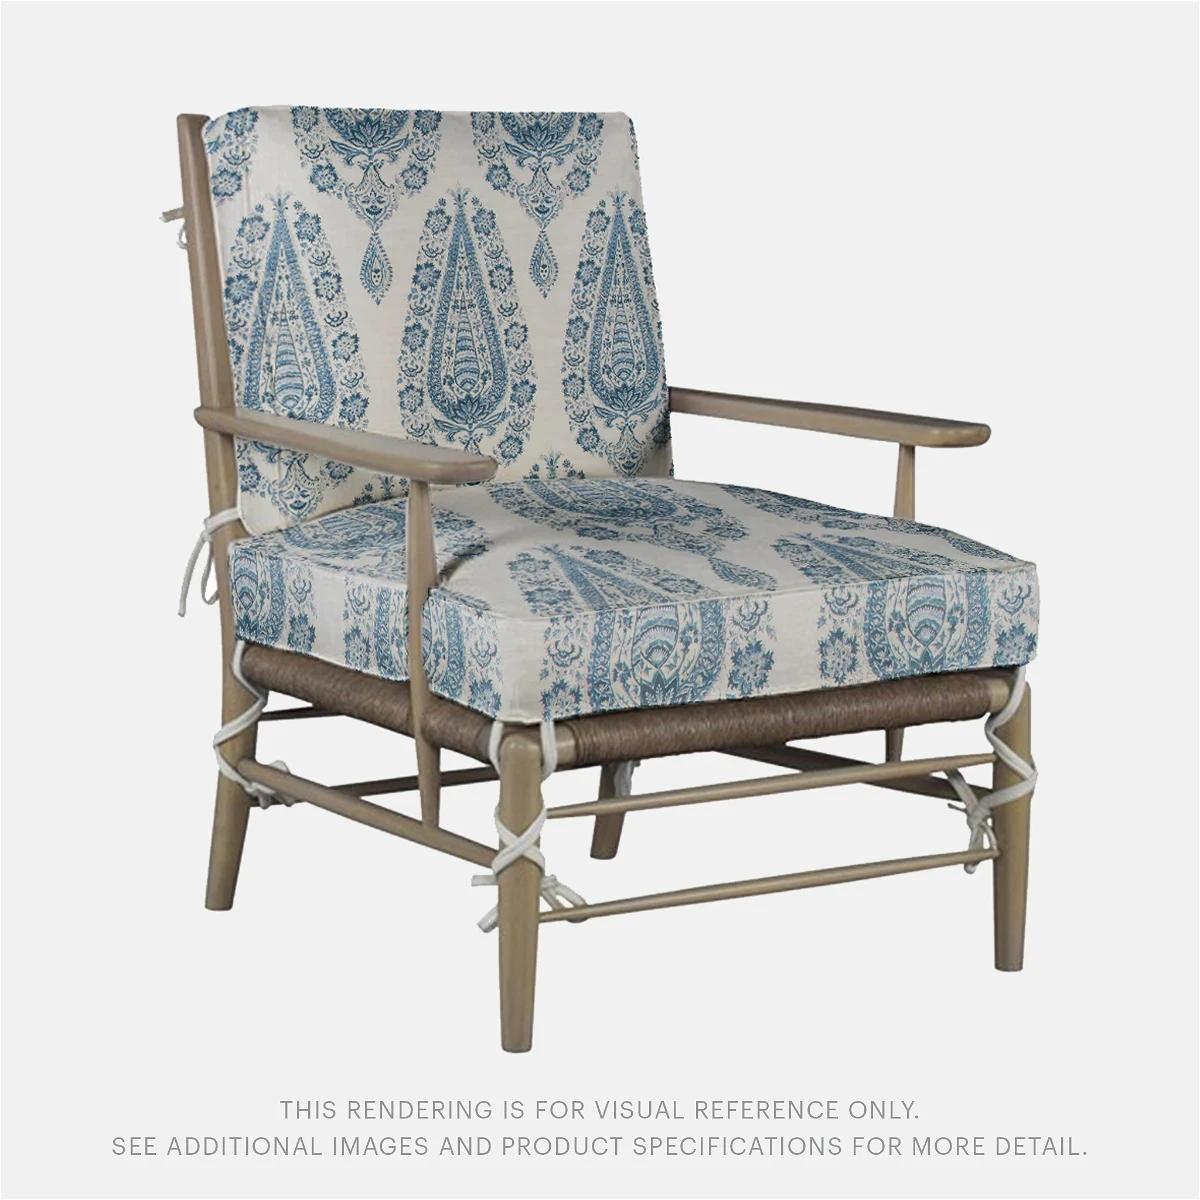 a chair with a blue and white upholstered seat